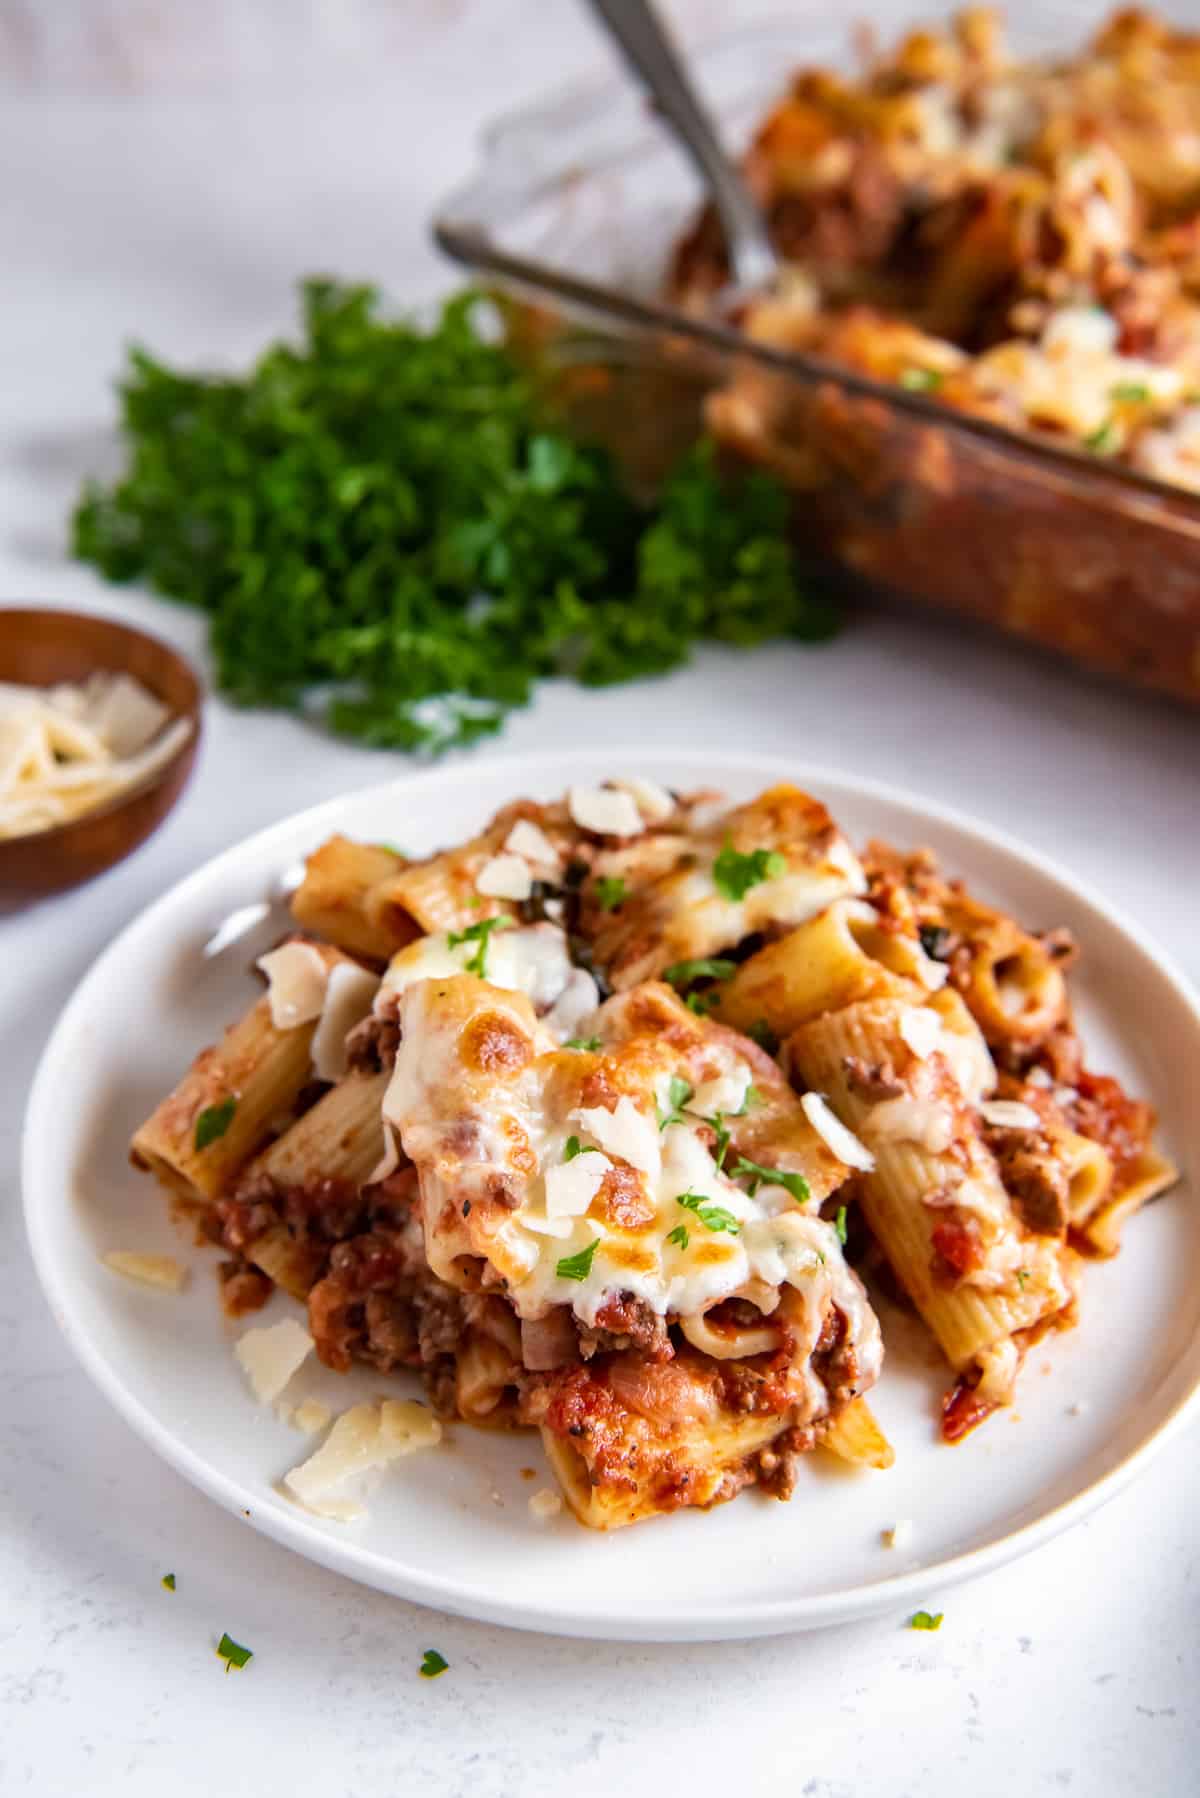 Rigatoni with meat sauce on a white plate.